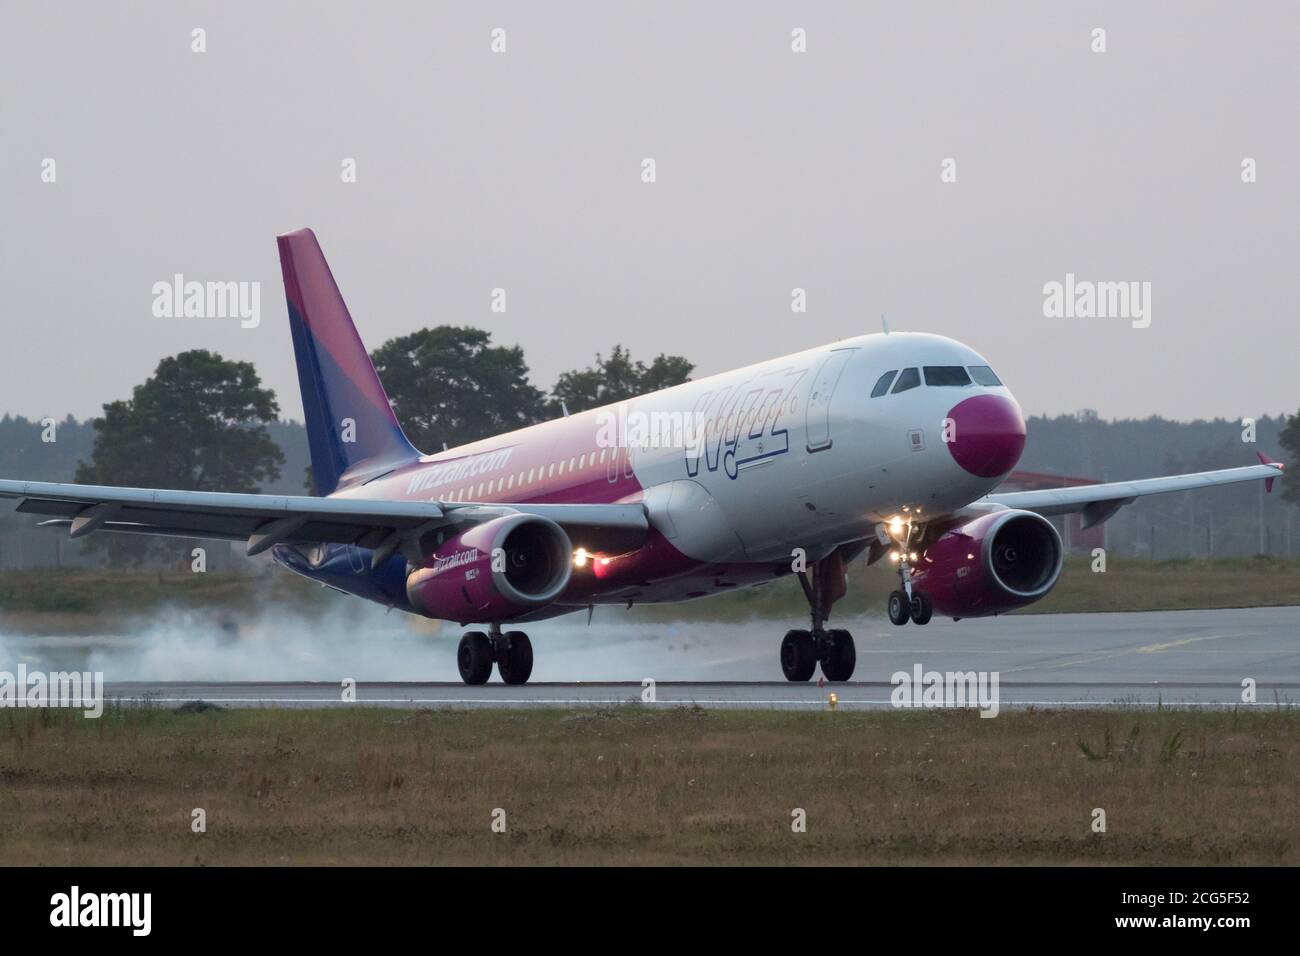 Low cost airline Wizz Air aircraft Airbus A320-232 in Gdansk, Poland. August 7th 2020 © Wojciech Strozyk / Alamy Stock Photo Stock Photo